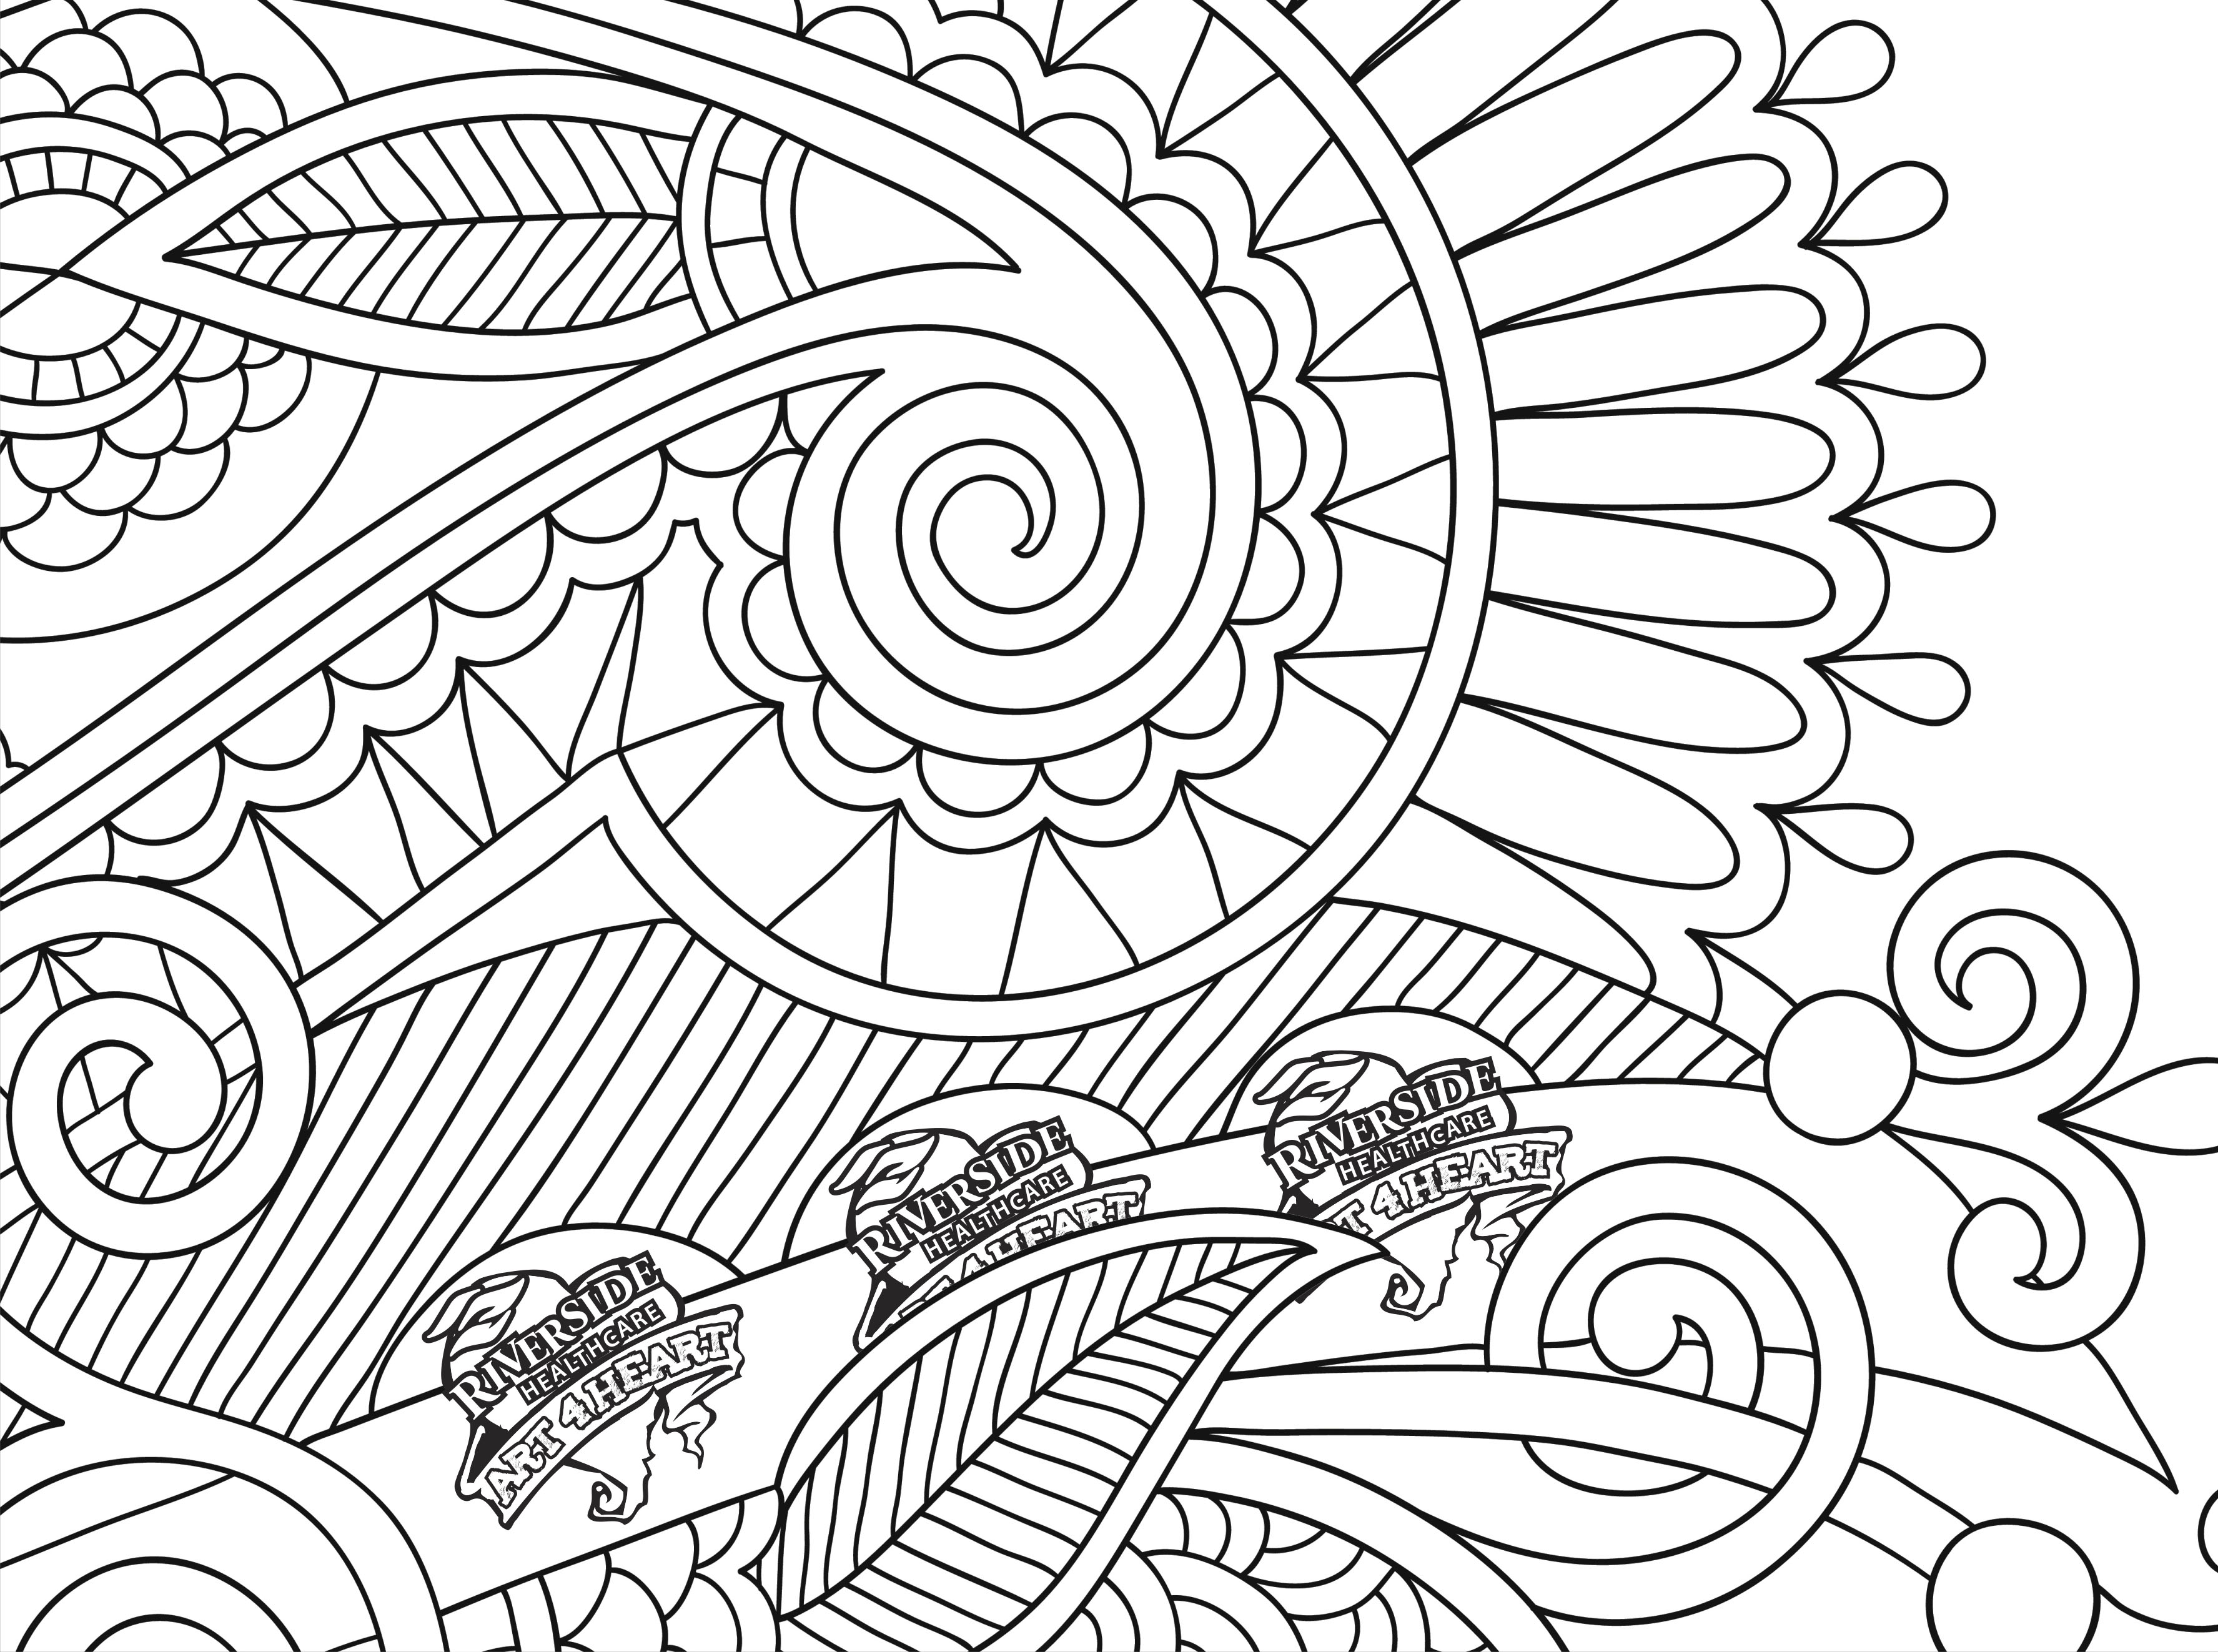 Coloring Pages For Seniors At GetColorings Free Printable Colorings Pages To Print And Color